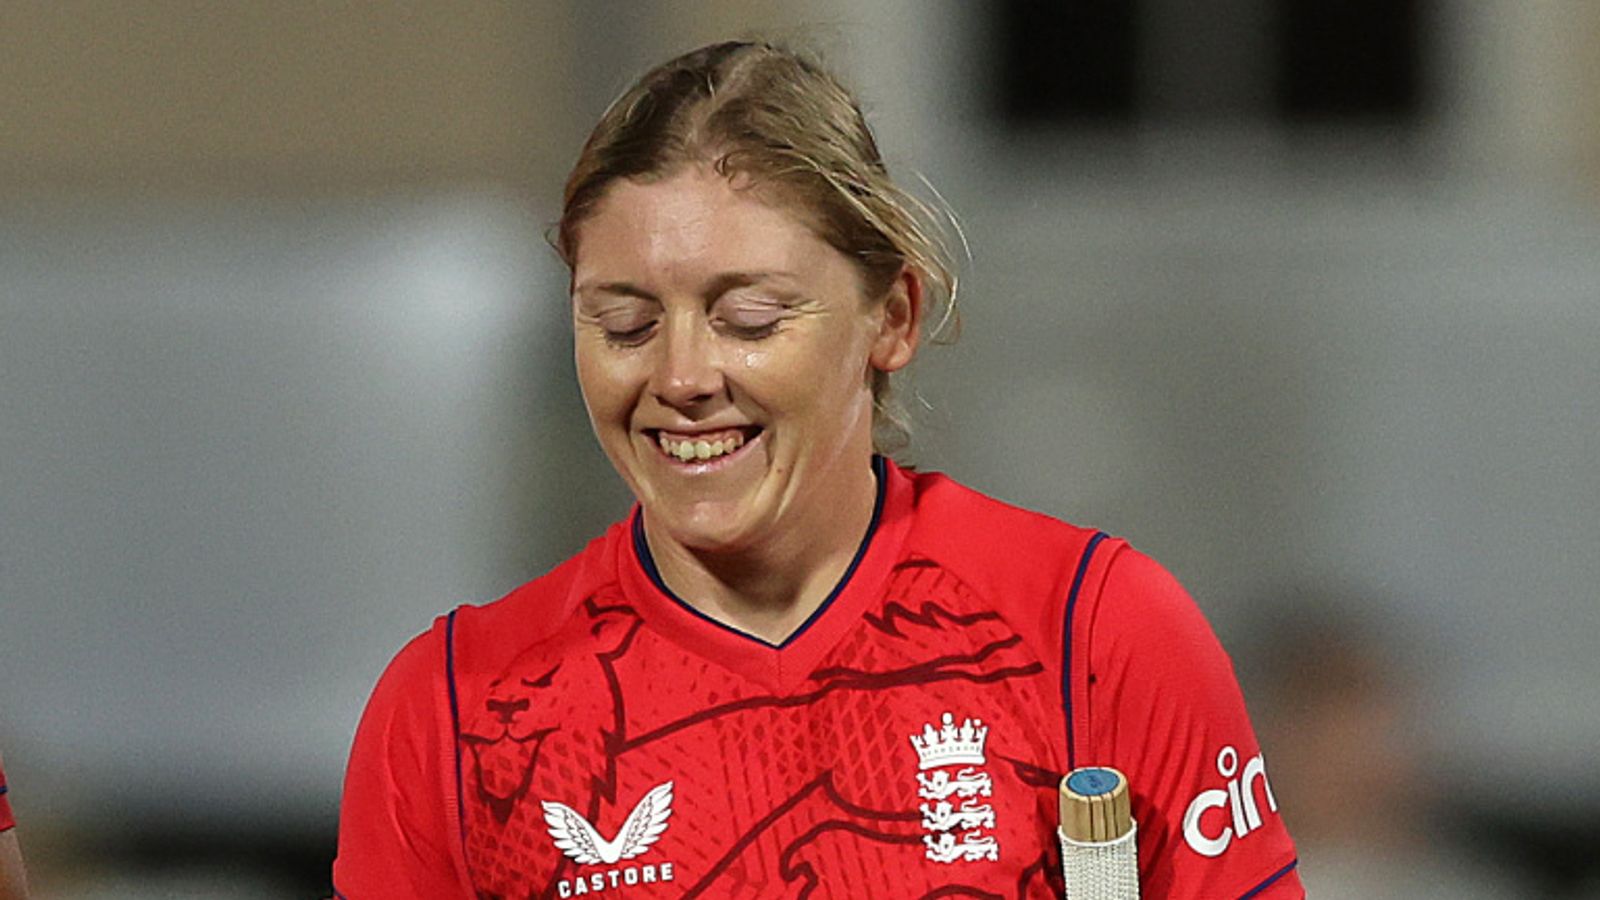 Commonwealth Games: England captain Heather Knight to miss opening game with hip injury